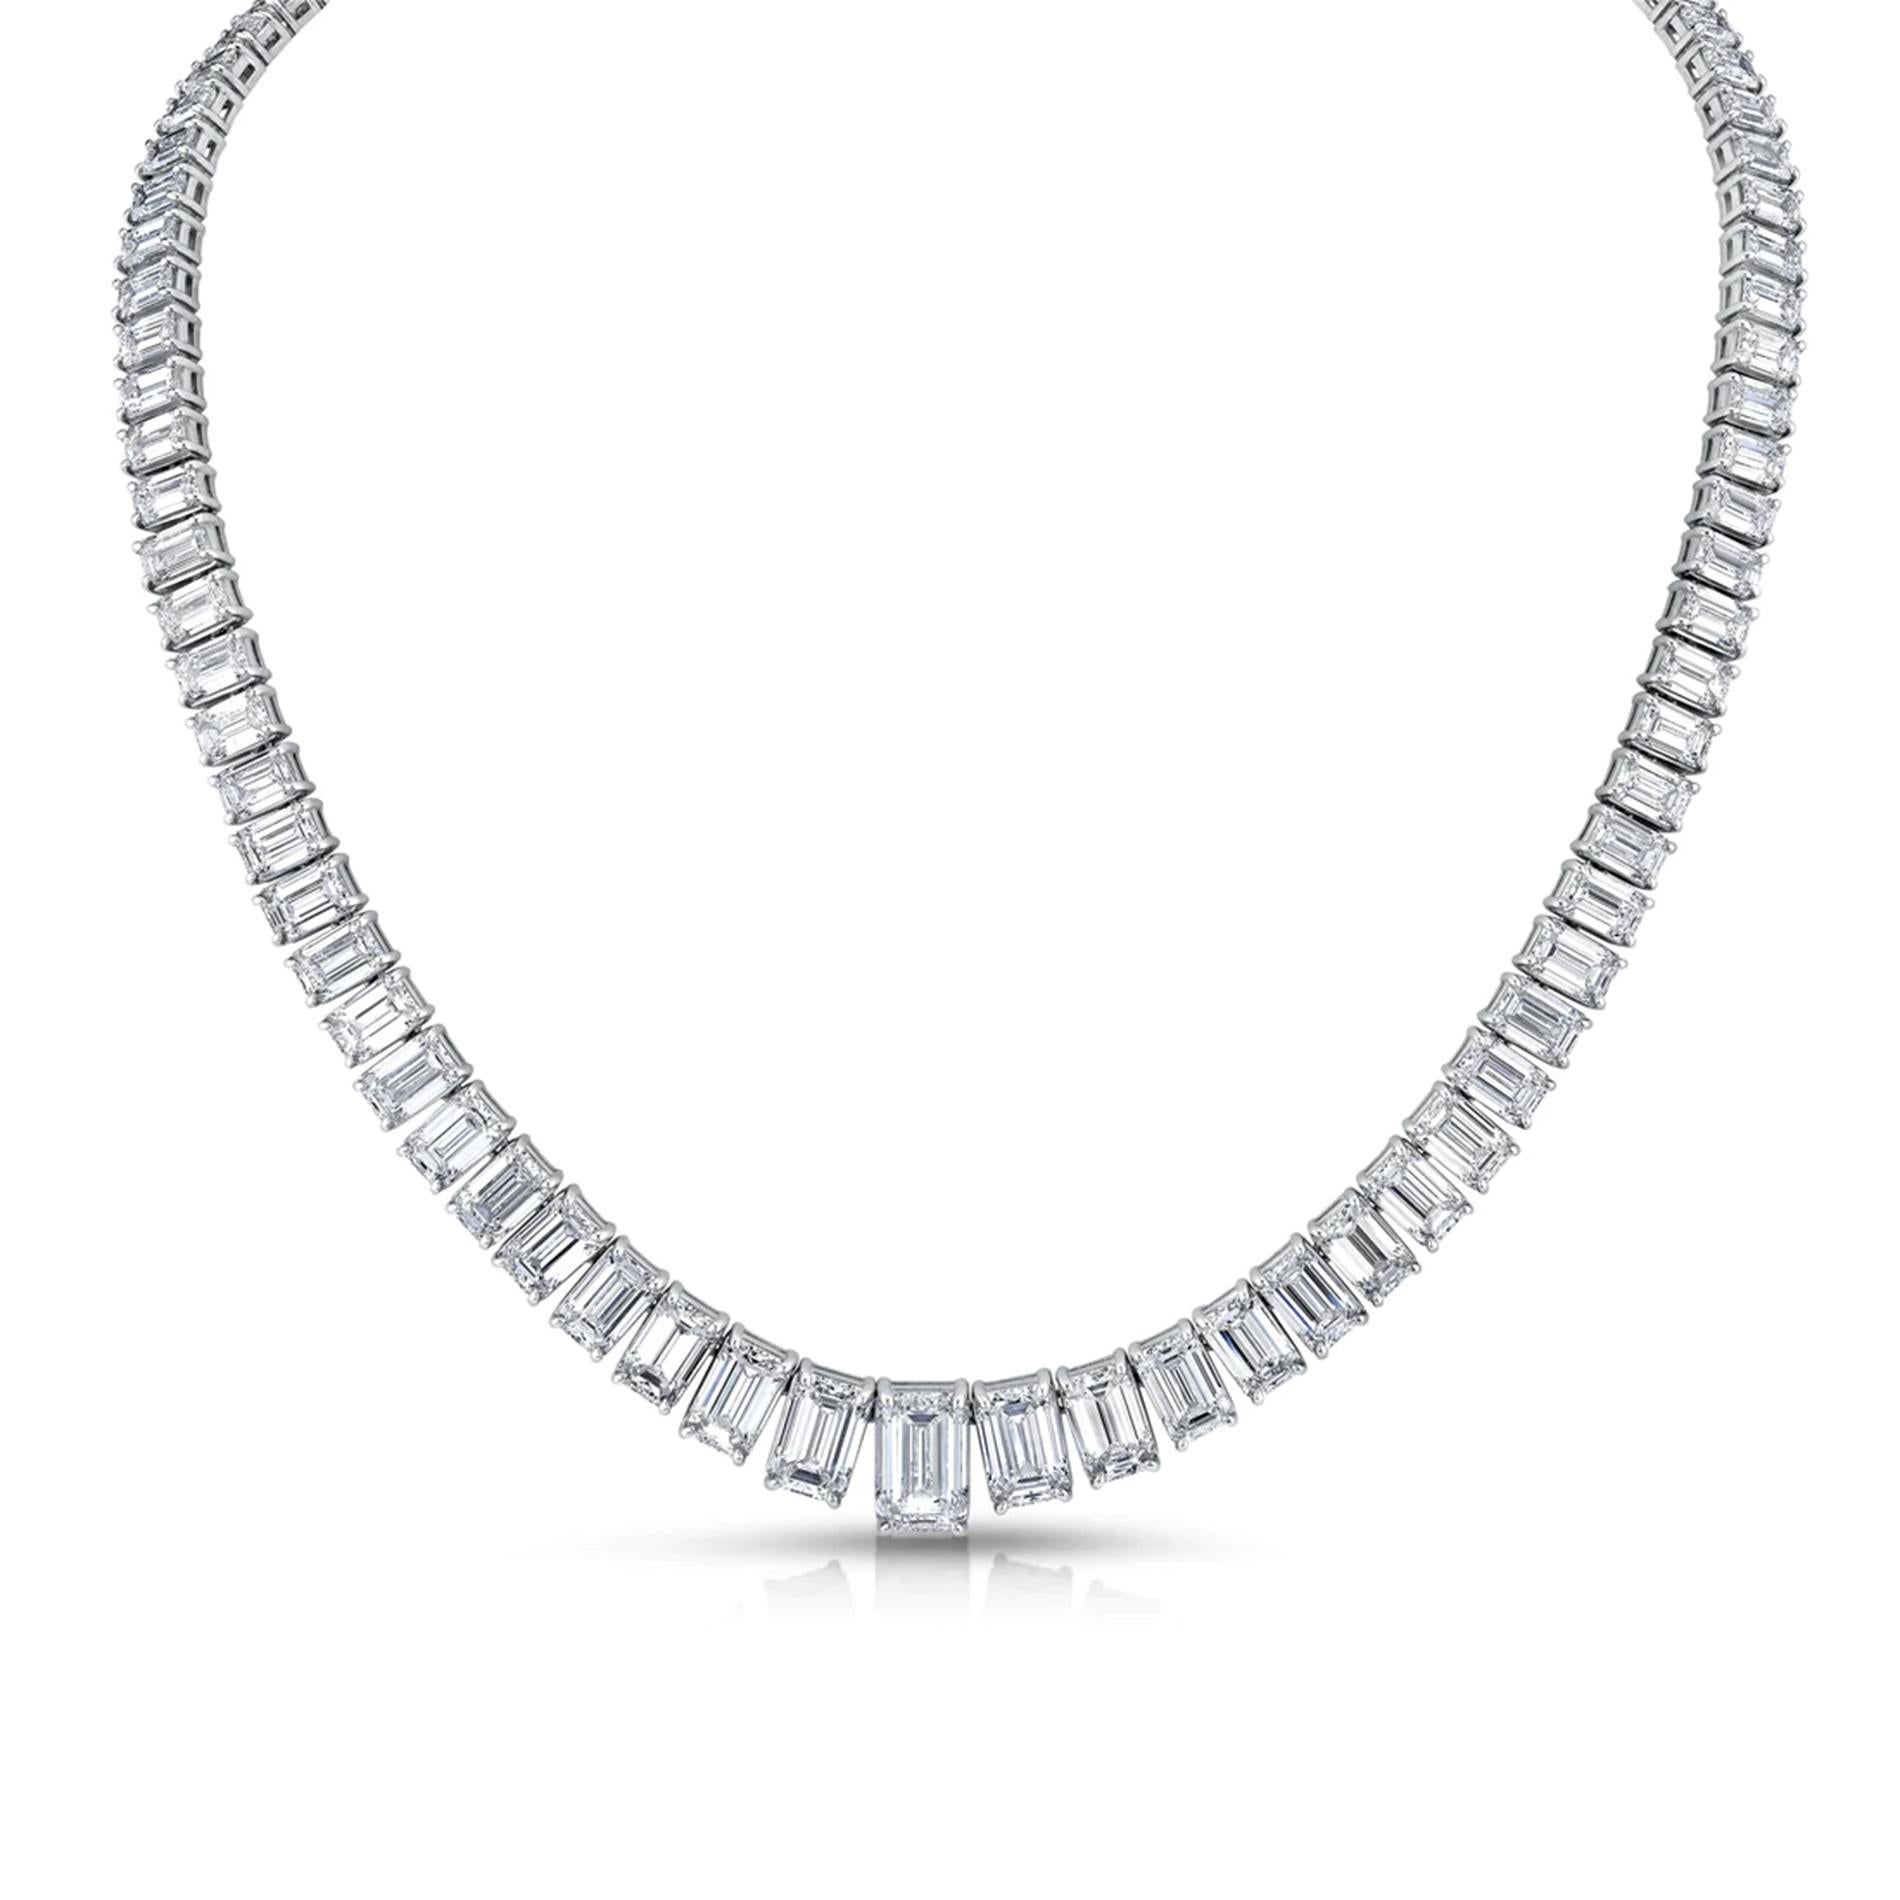 Elevate your elegance with our exquisite 19-inch Graduated Tennis Necklace, meticulously crafted in platinum and adorned with captivating emerald-cut diamonds.

Each diamond is expertly set in a secure four-prong setting, showcasing their brilliance